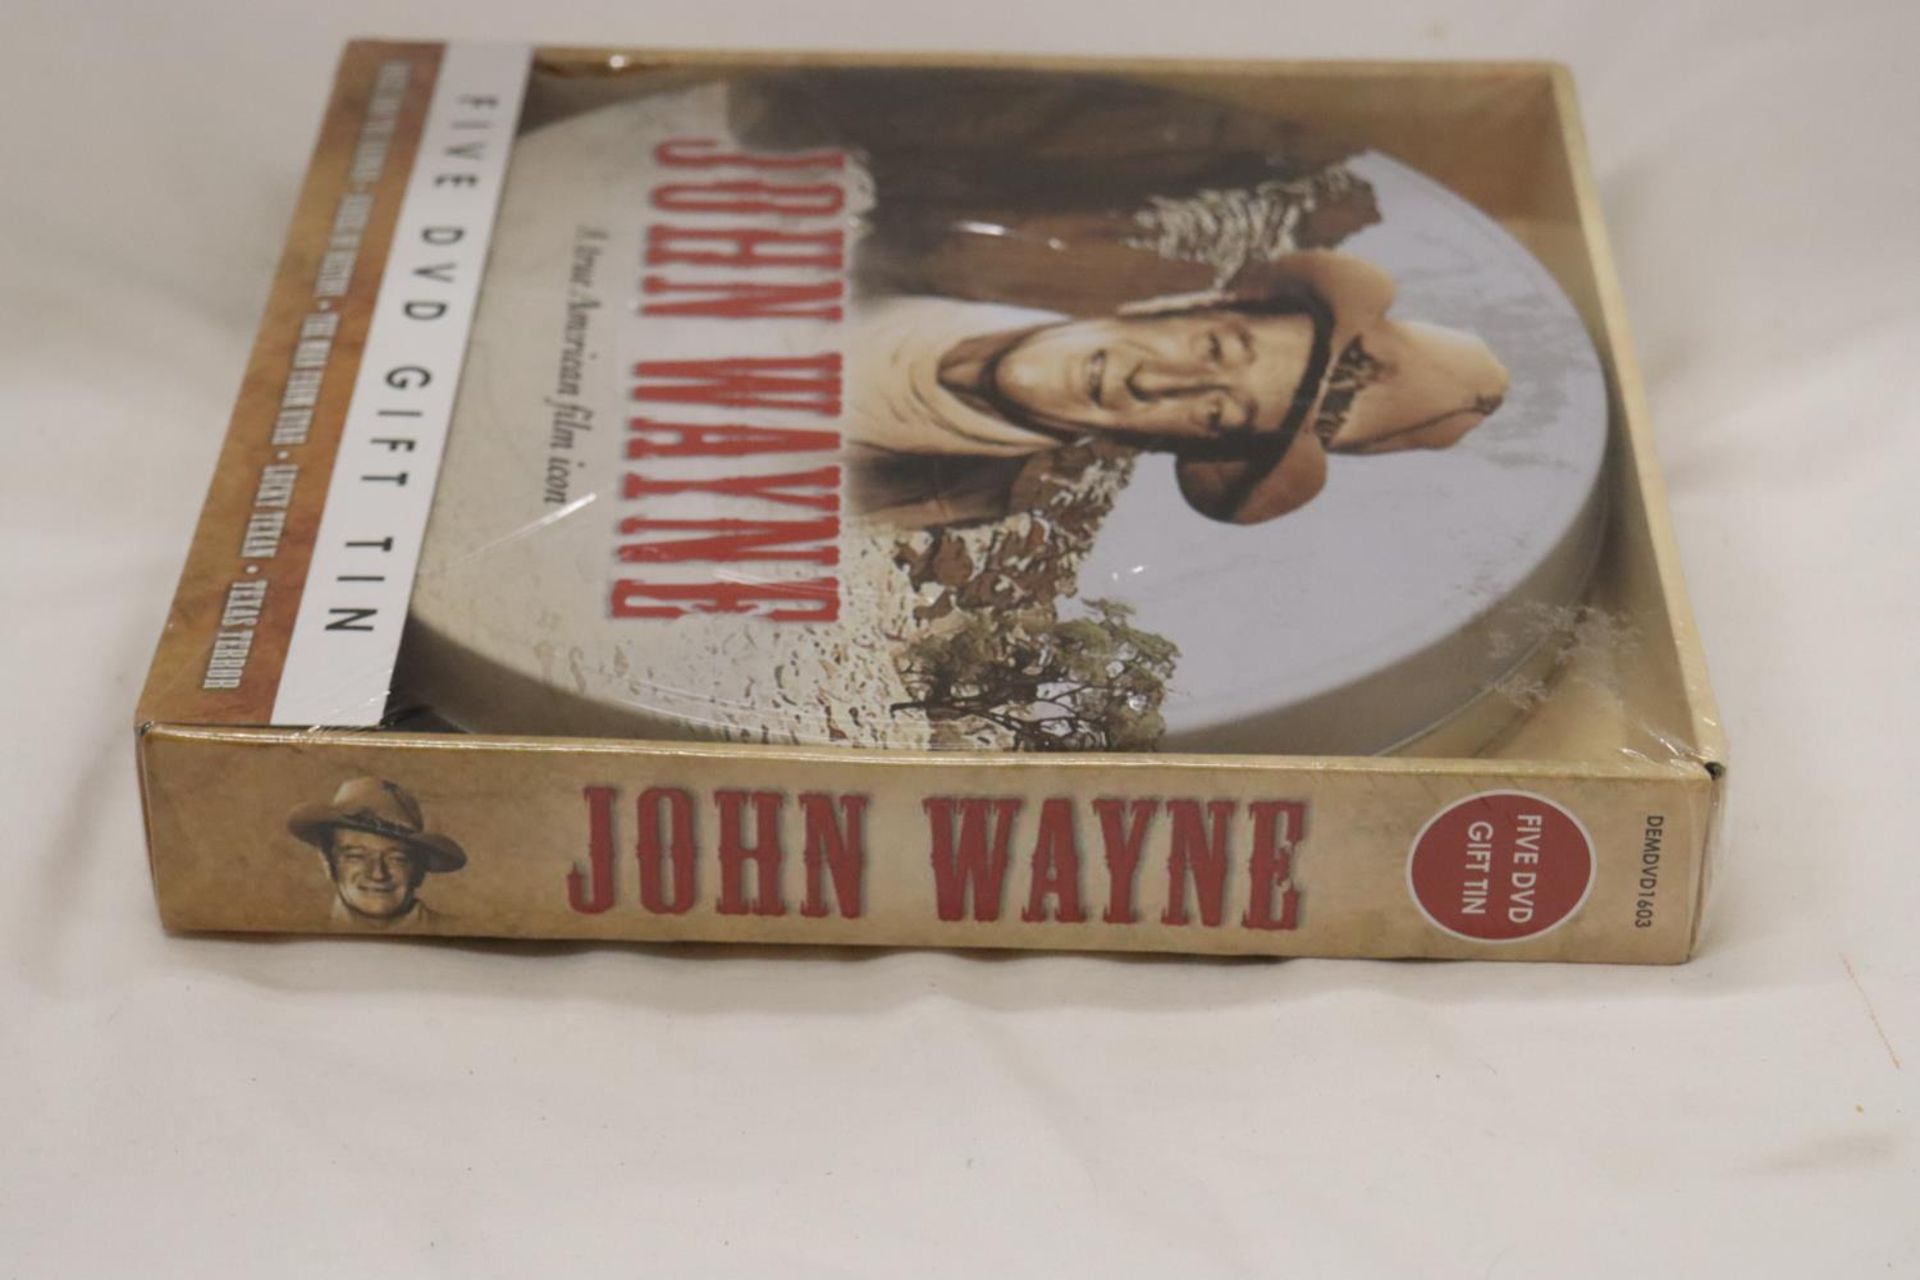 A NEW AND SEALED SET OF FIVE JOHN WAYNE DVD'S IN A METAL GIFT TIN - Image 2 of 4